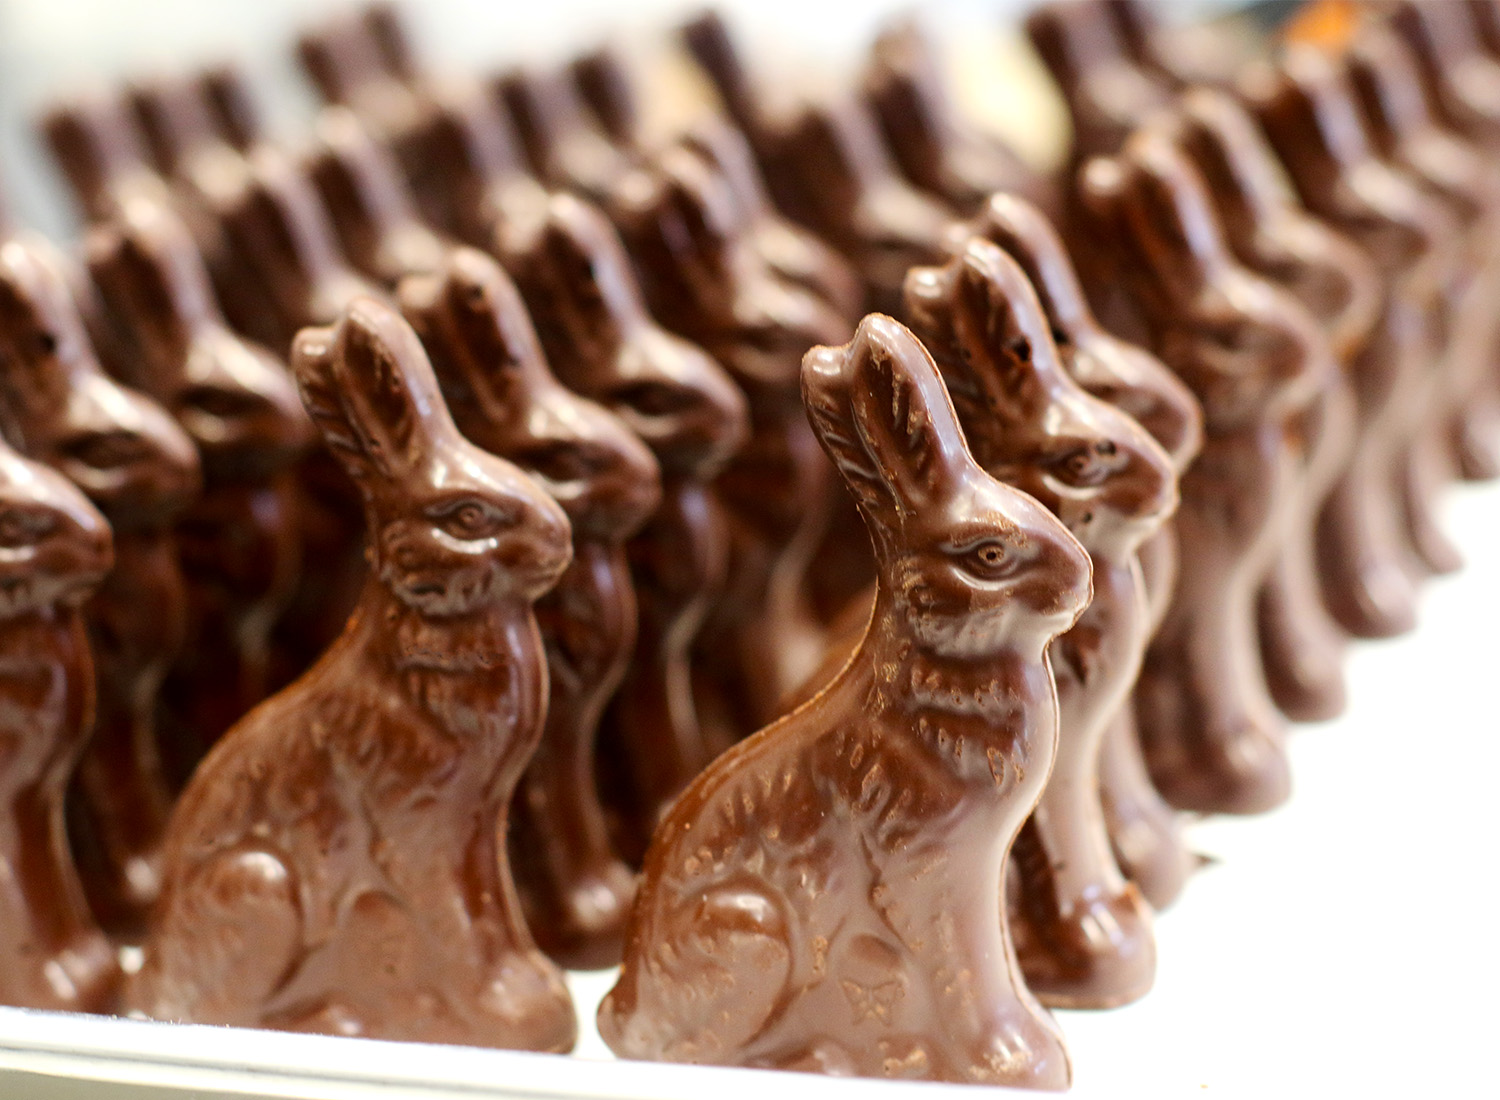 You Can Eat Chocolate Only If You Get More Than 10 on This Quiz Chocolate Easter Bunny